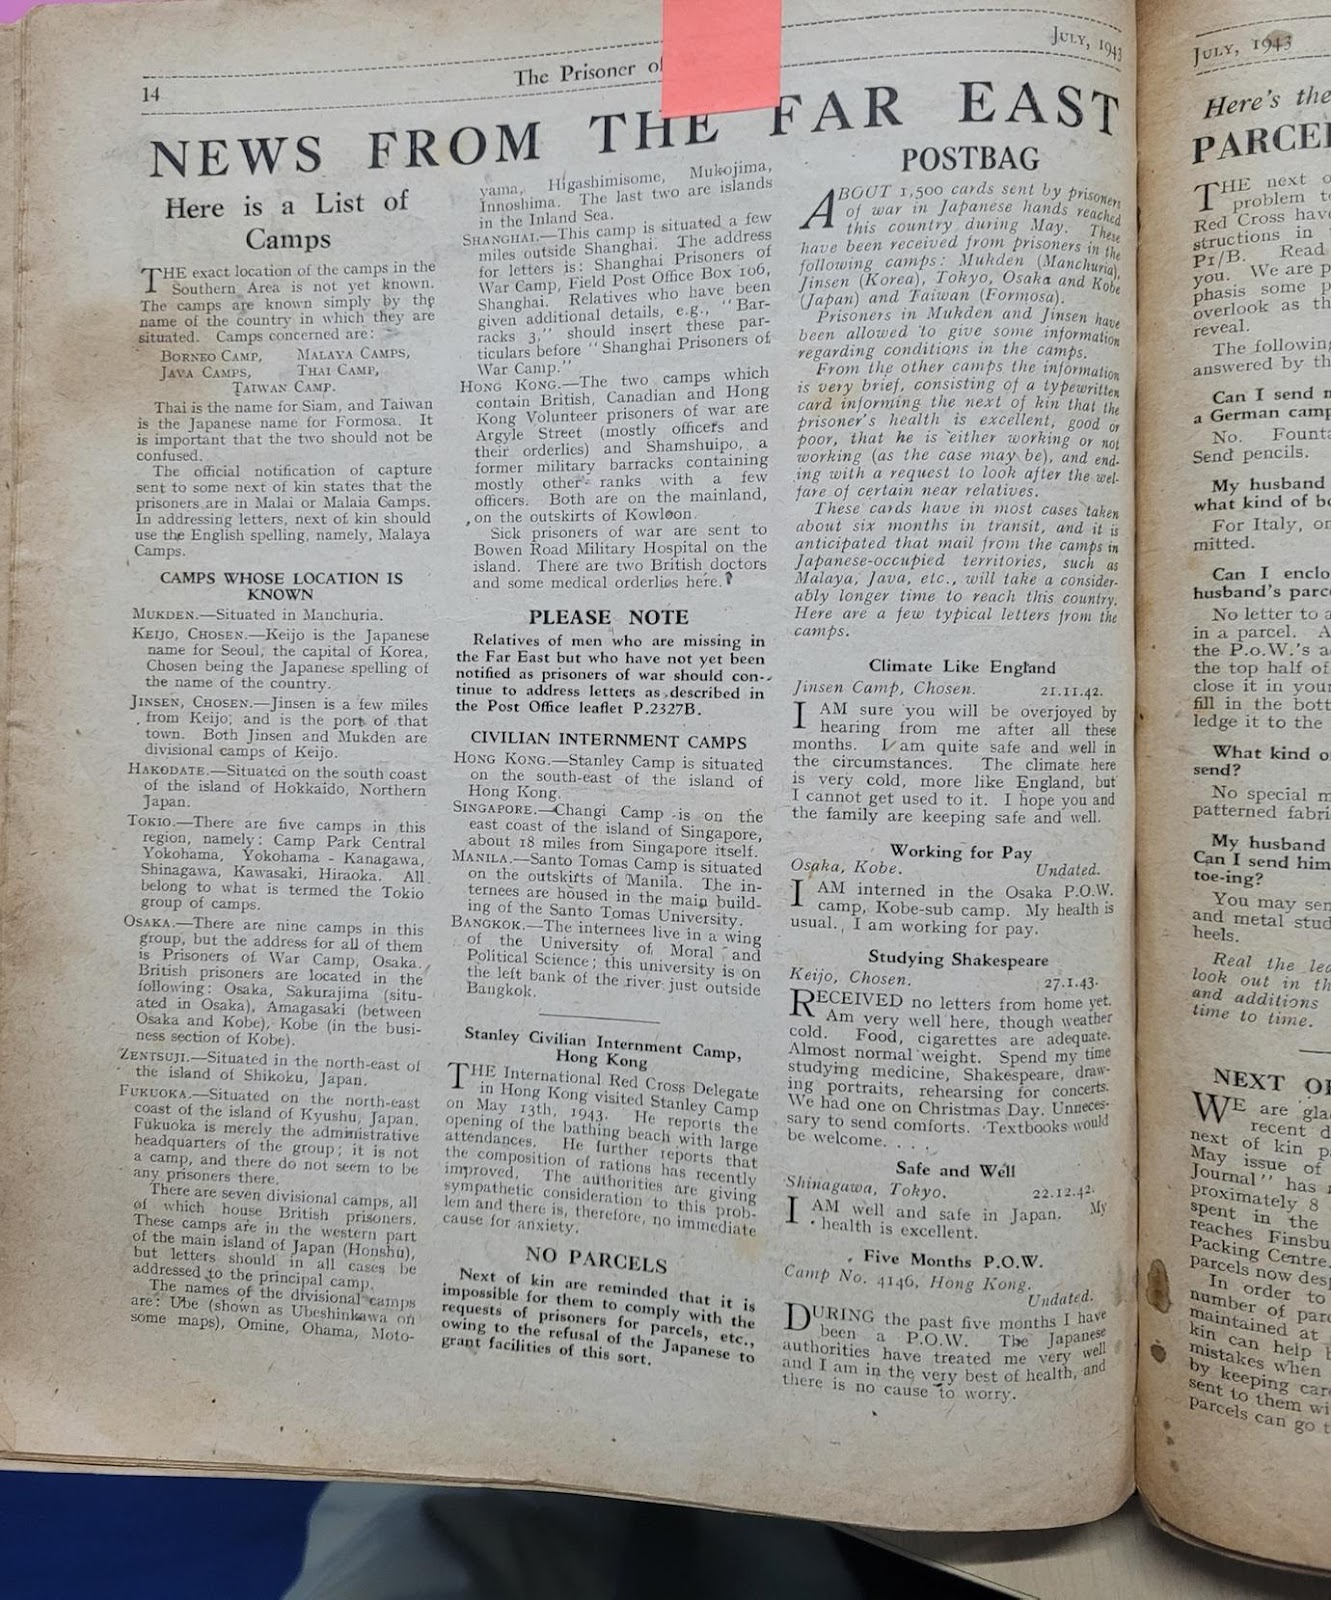 An old newspaper with black text

Description automatically generated